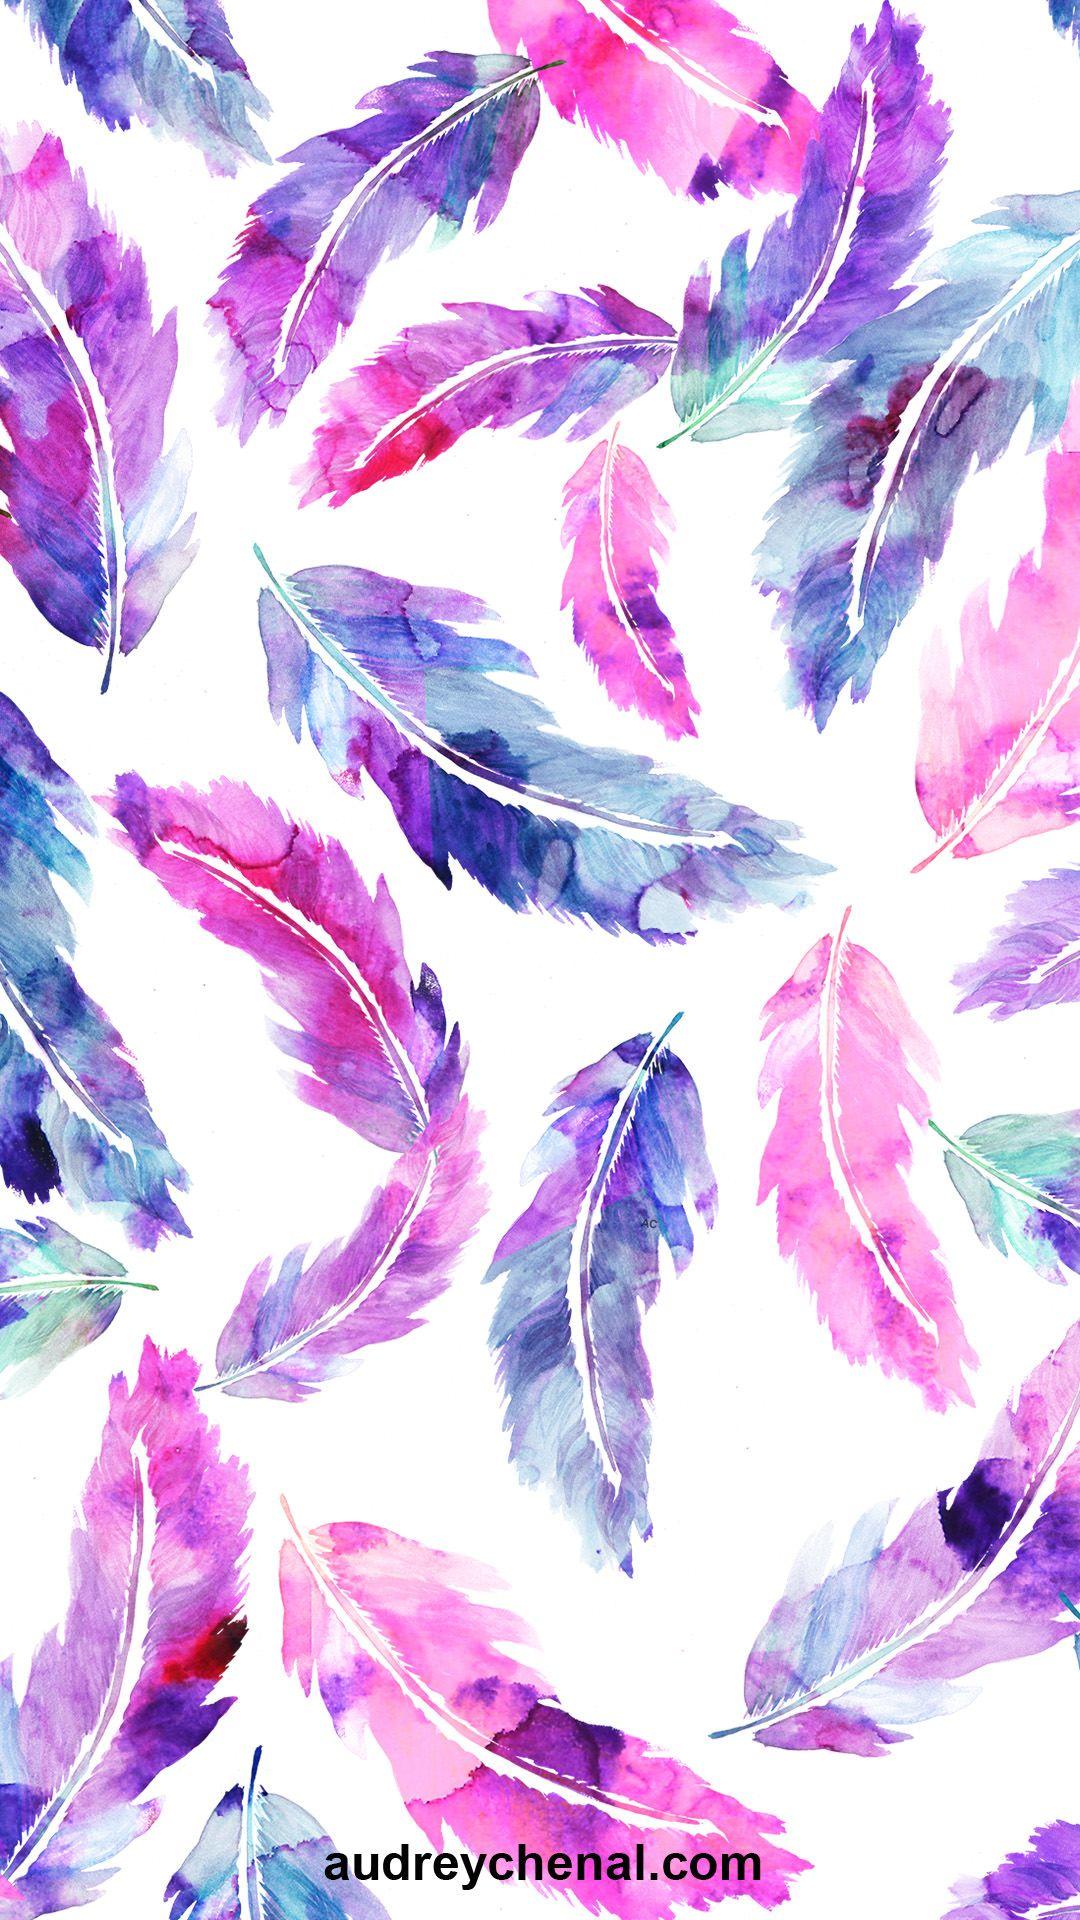 1080 x 1920 · jpeg - Modern girly free IPhone wallpapers background download | Wallpaper ...